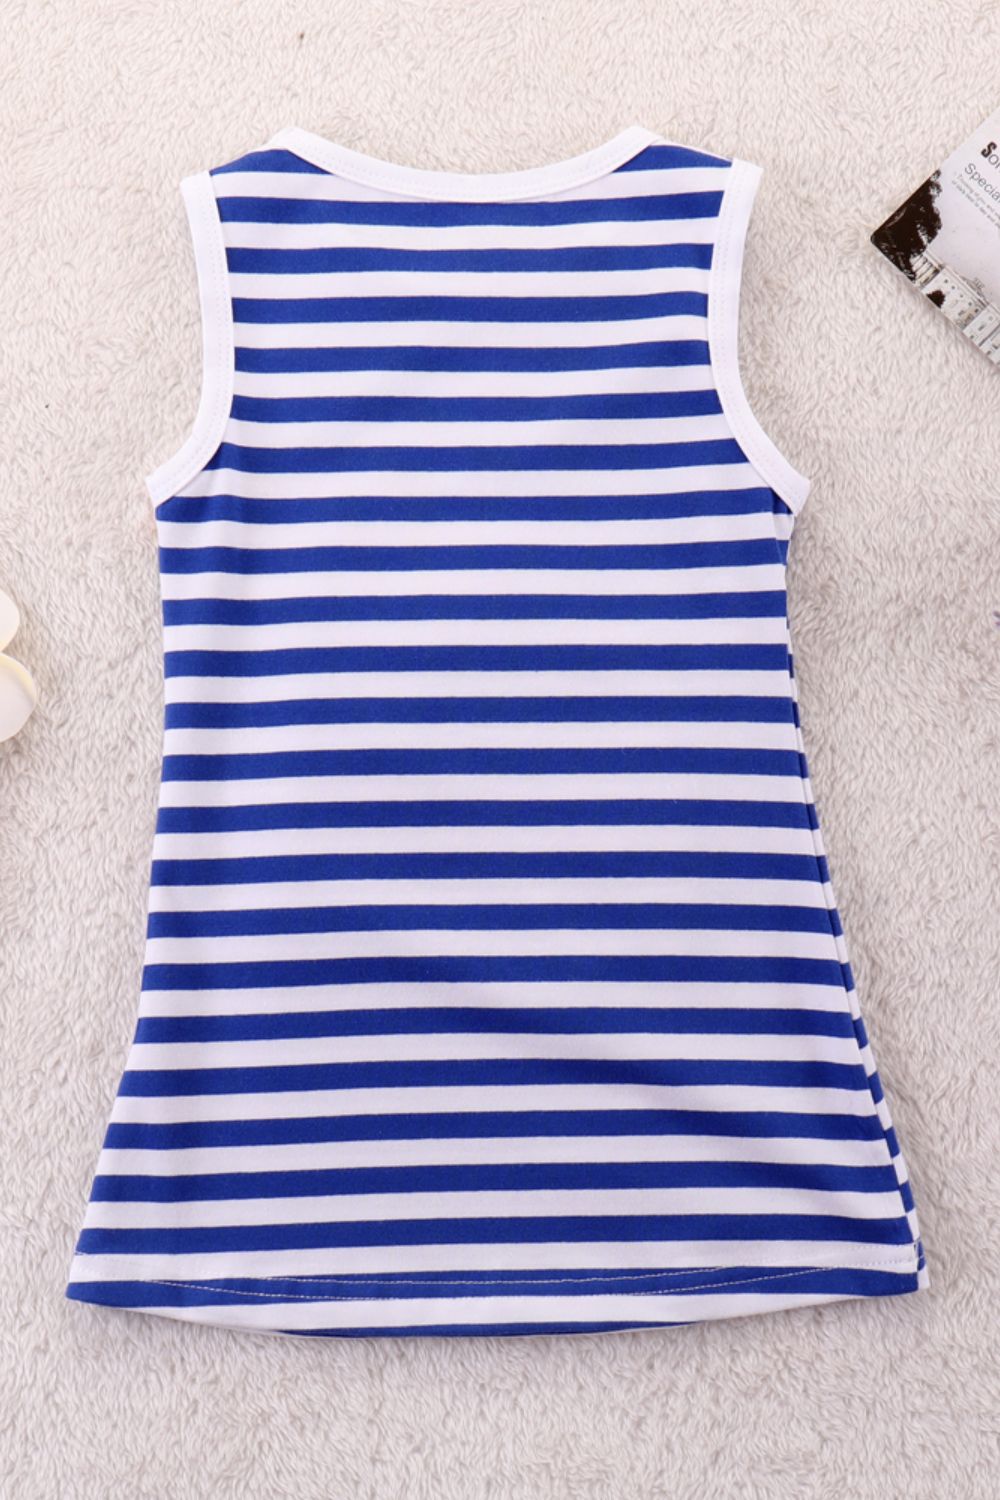 - Girls Rainbow Graphic Striped Sleeveless Dress - toddlers top at TFC&H Co.